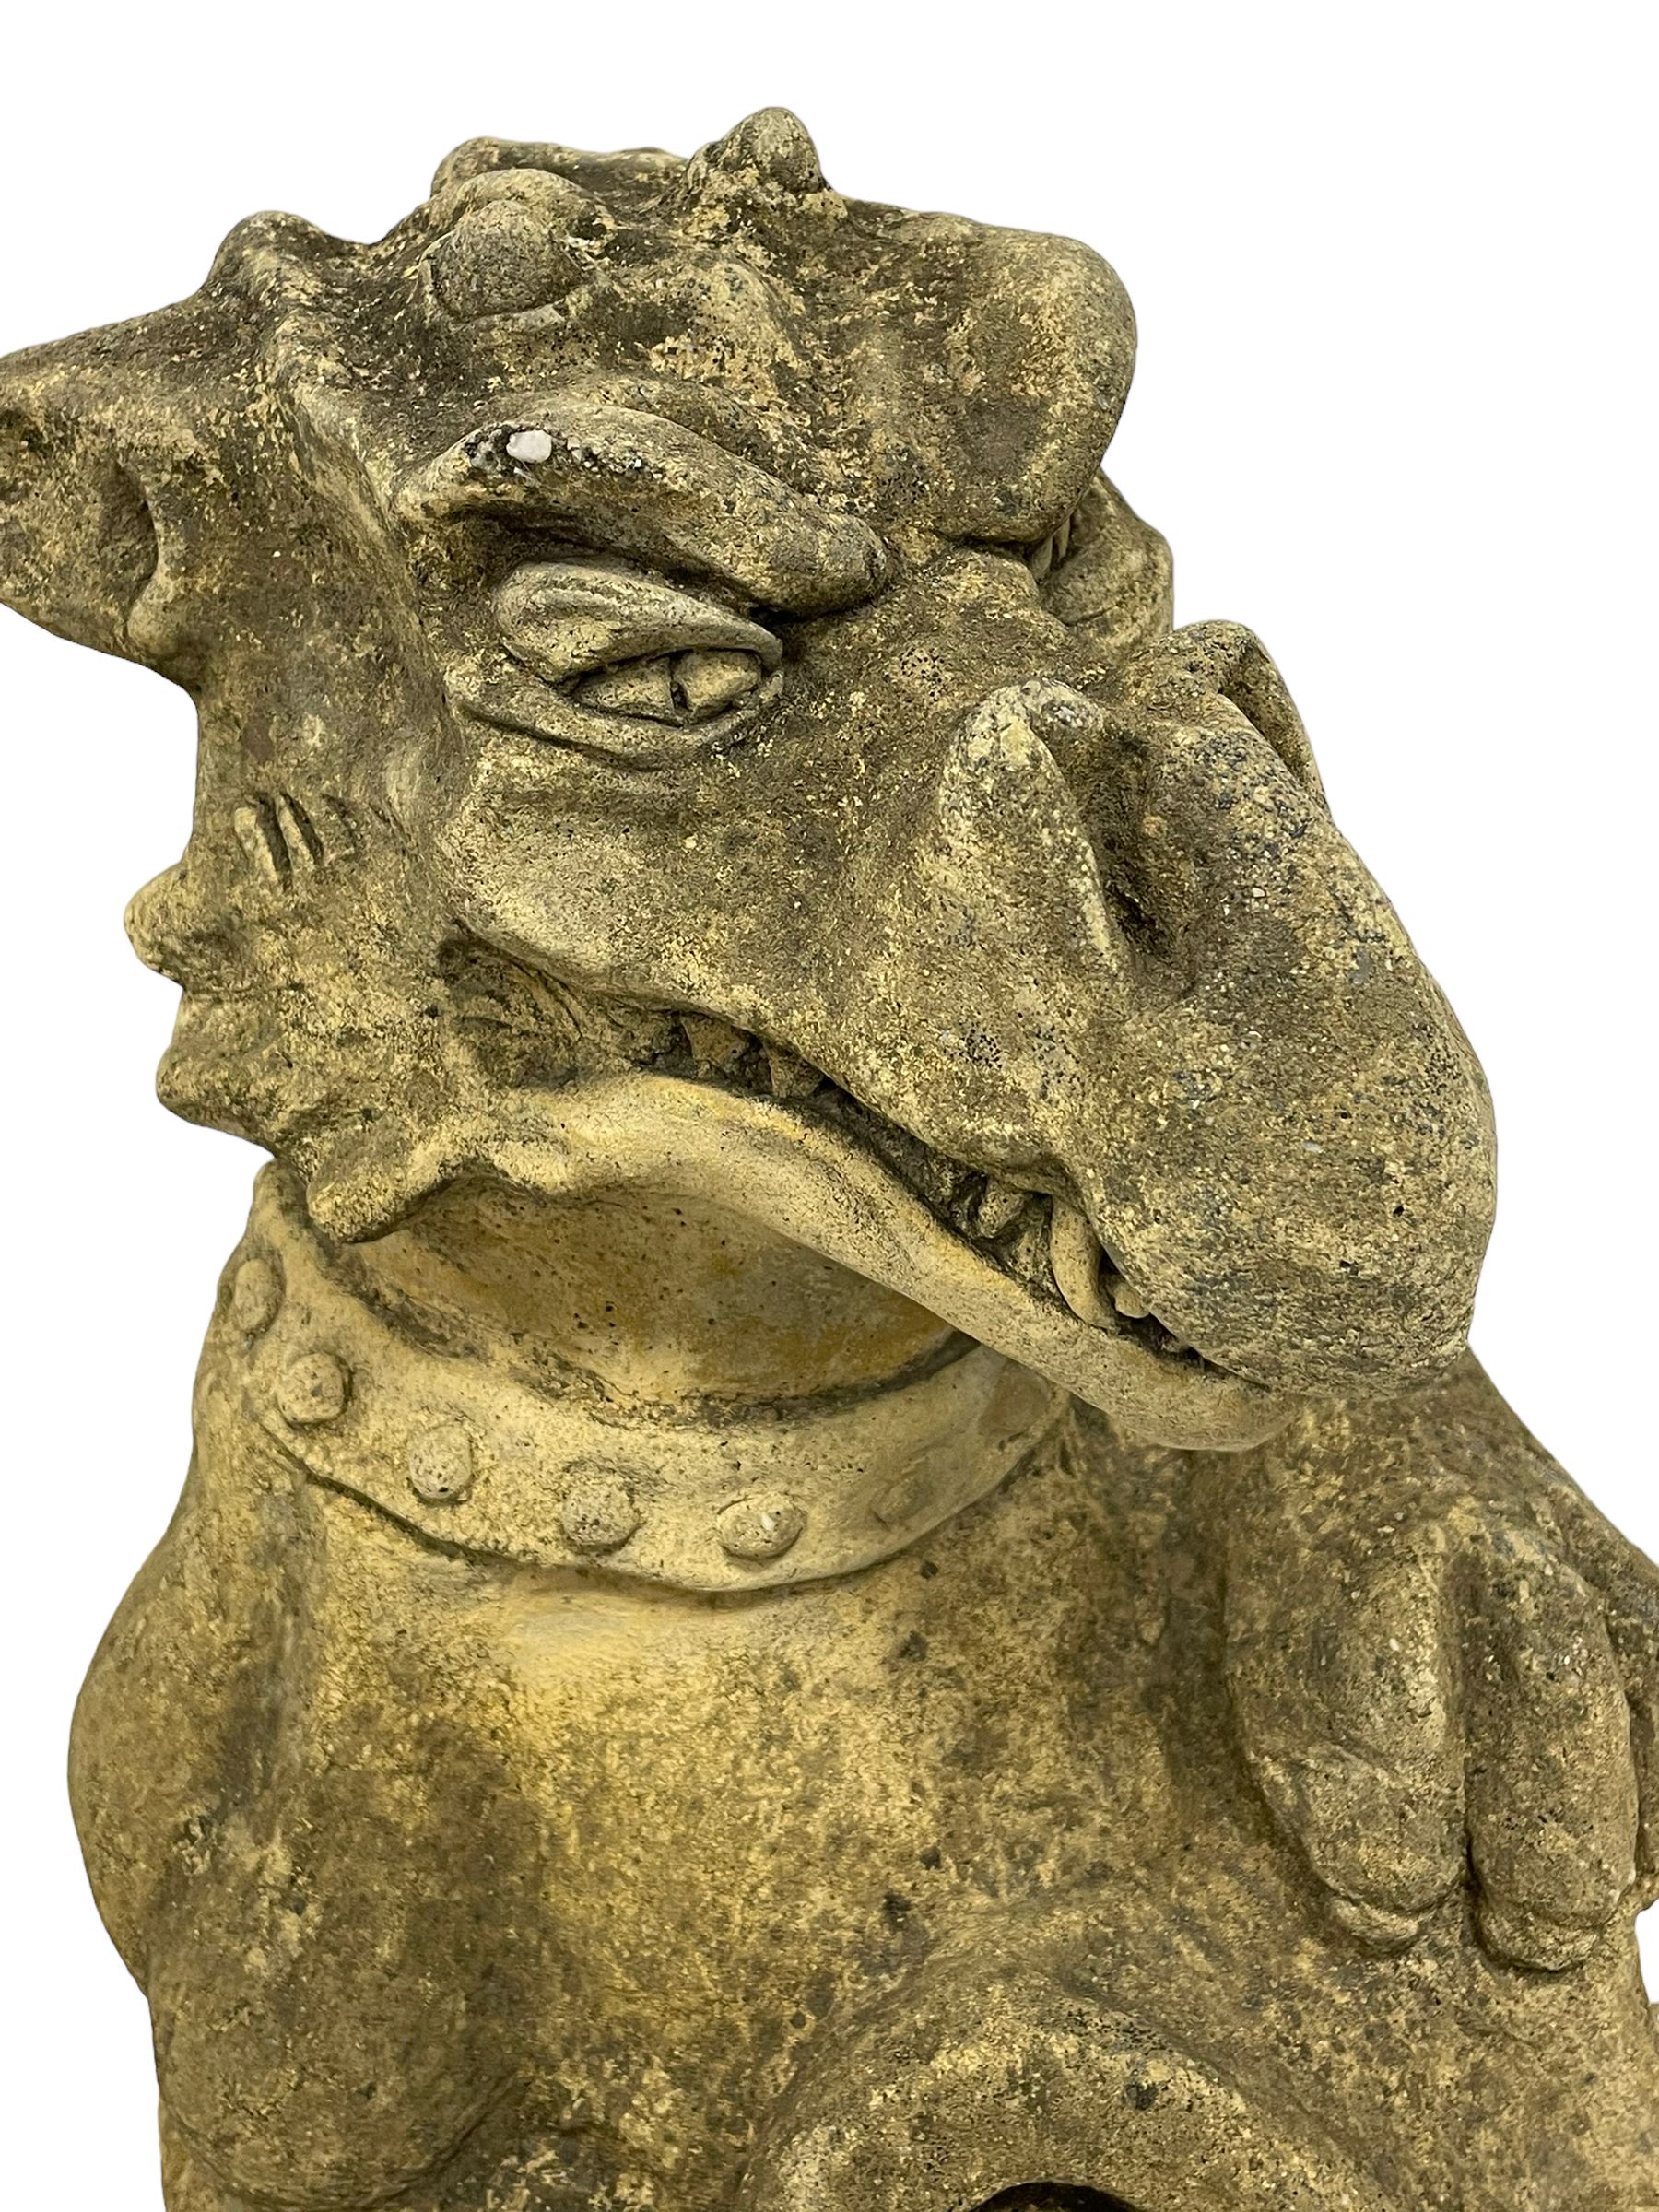 Pair of composite stone garden ornaments in the form of griffins or gargoyles holding cartouche shie - Image 3 of 6